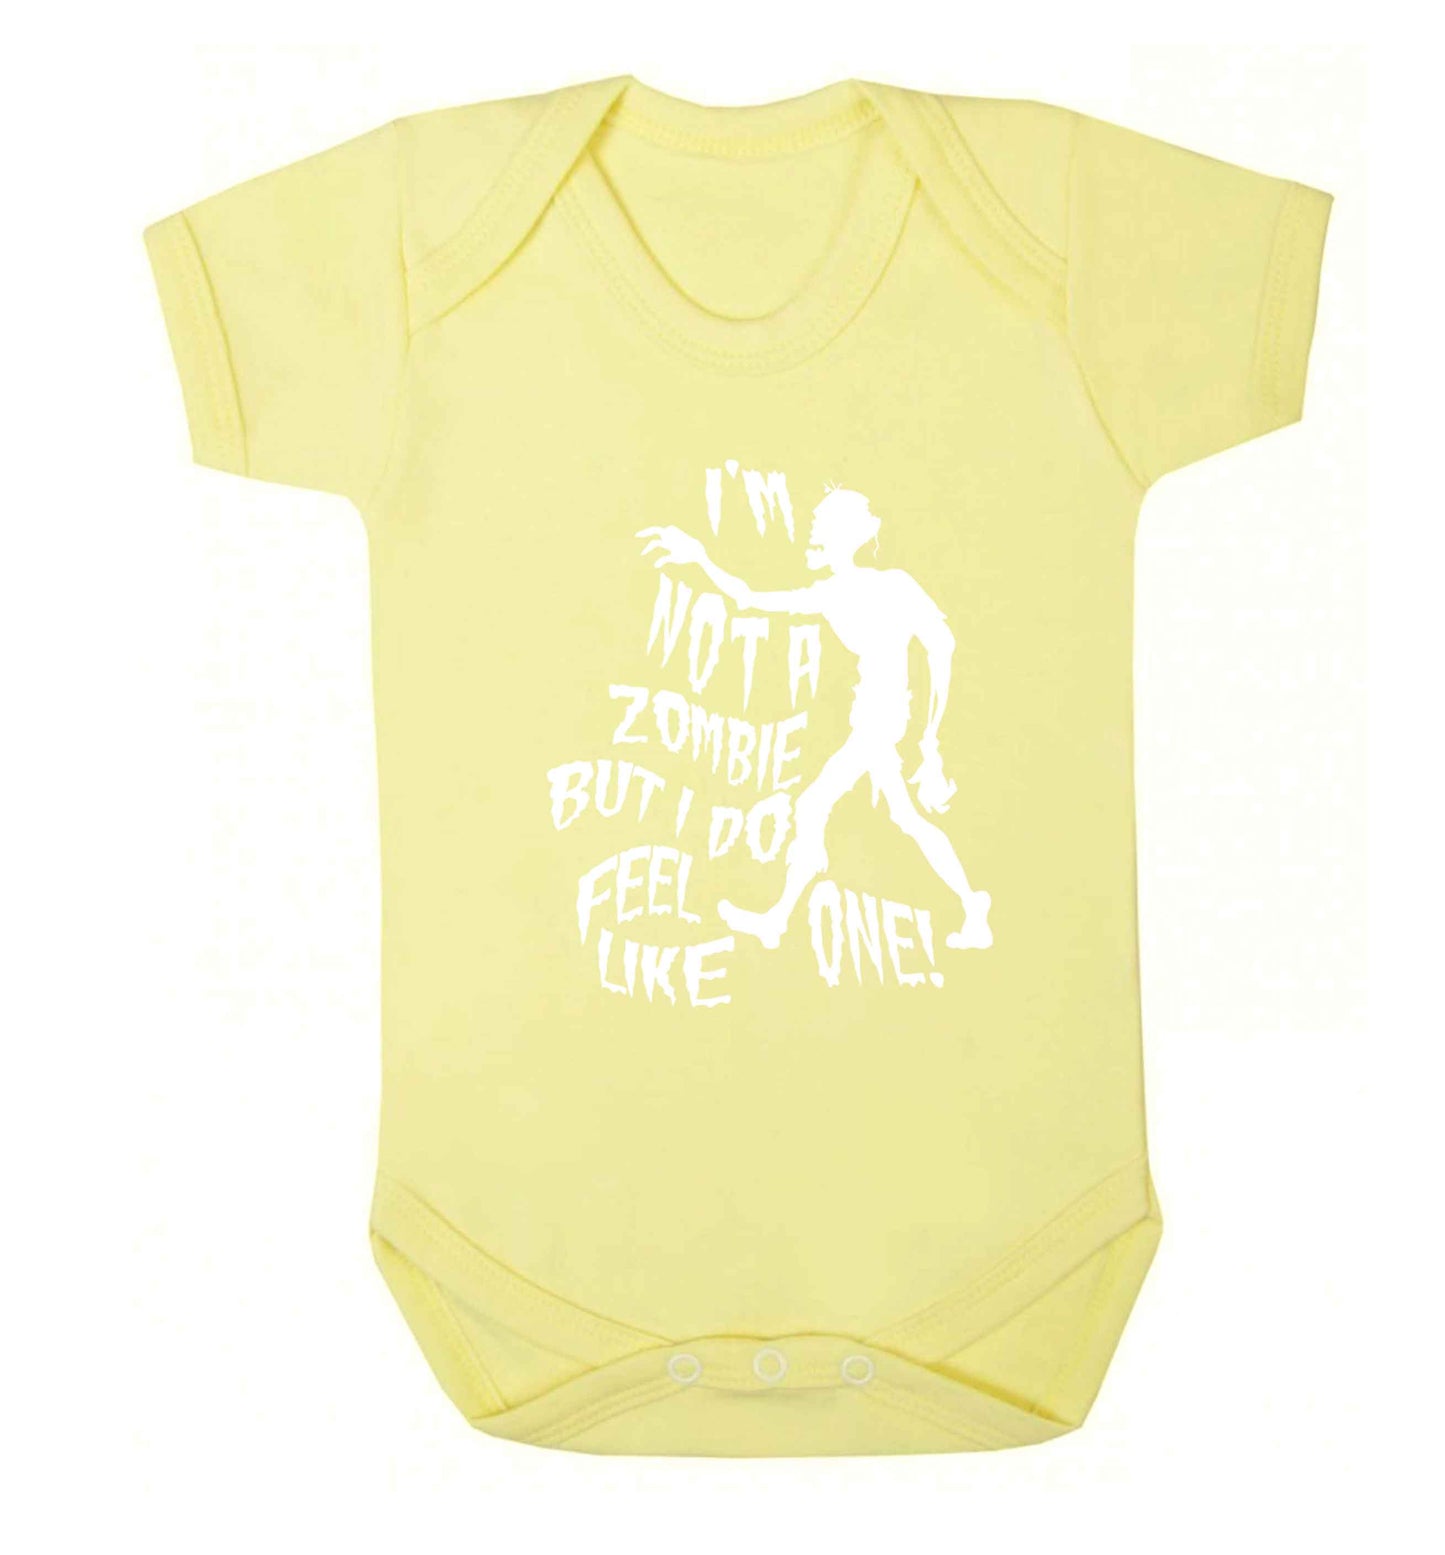 I'm not a zombie but I do feel like one! Baby Vest pale yellow 18-24 months